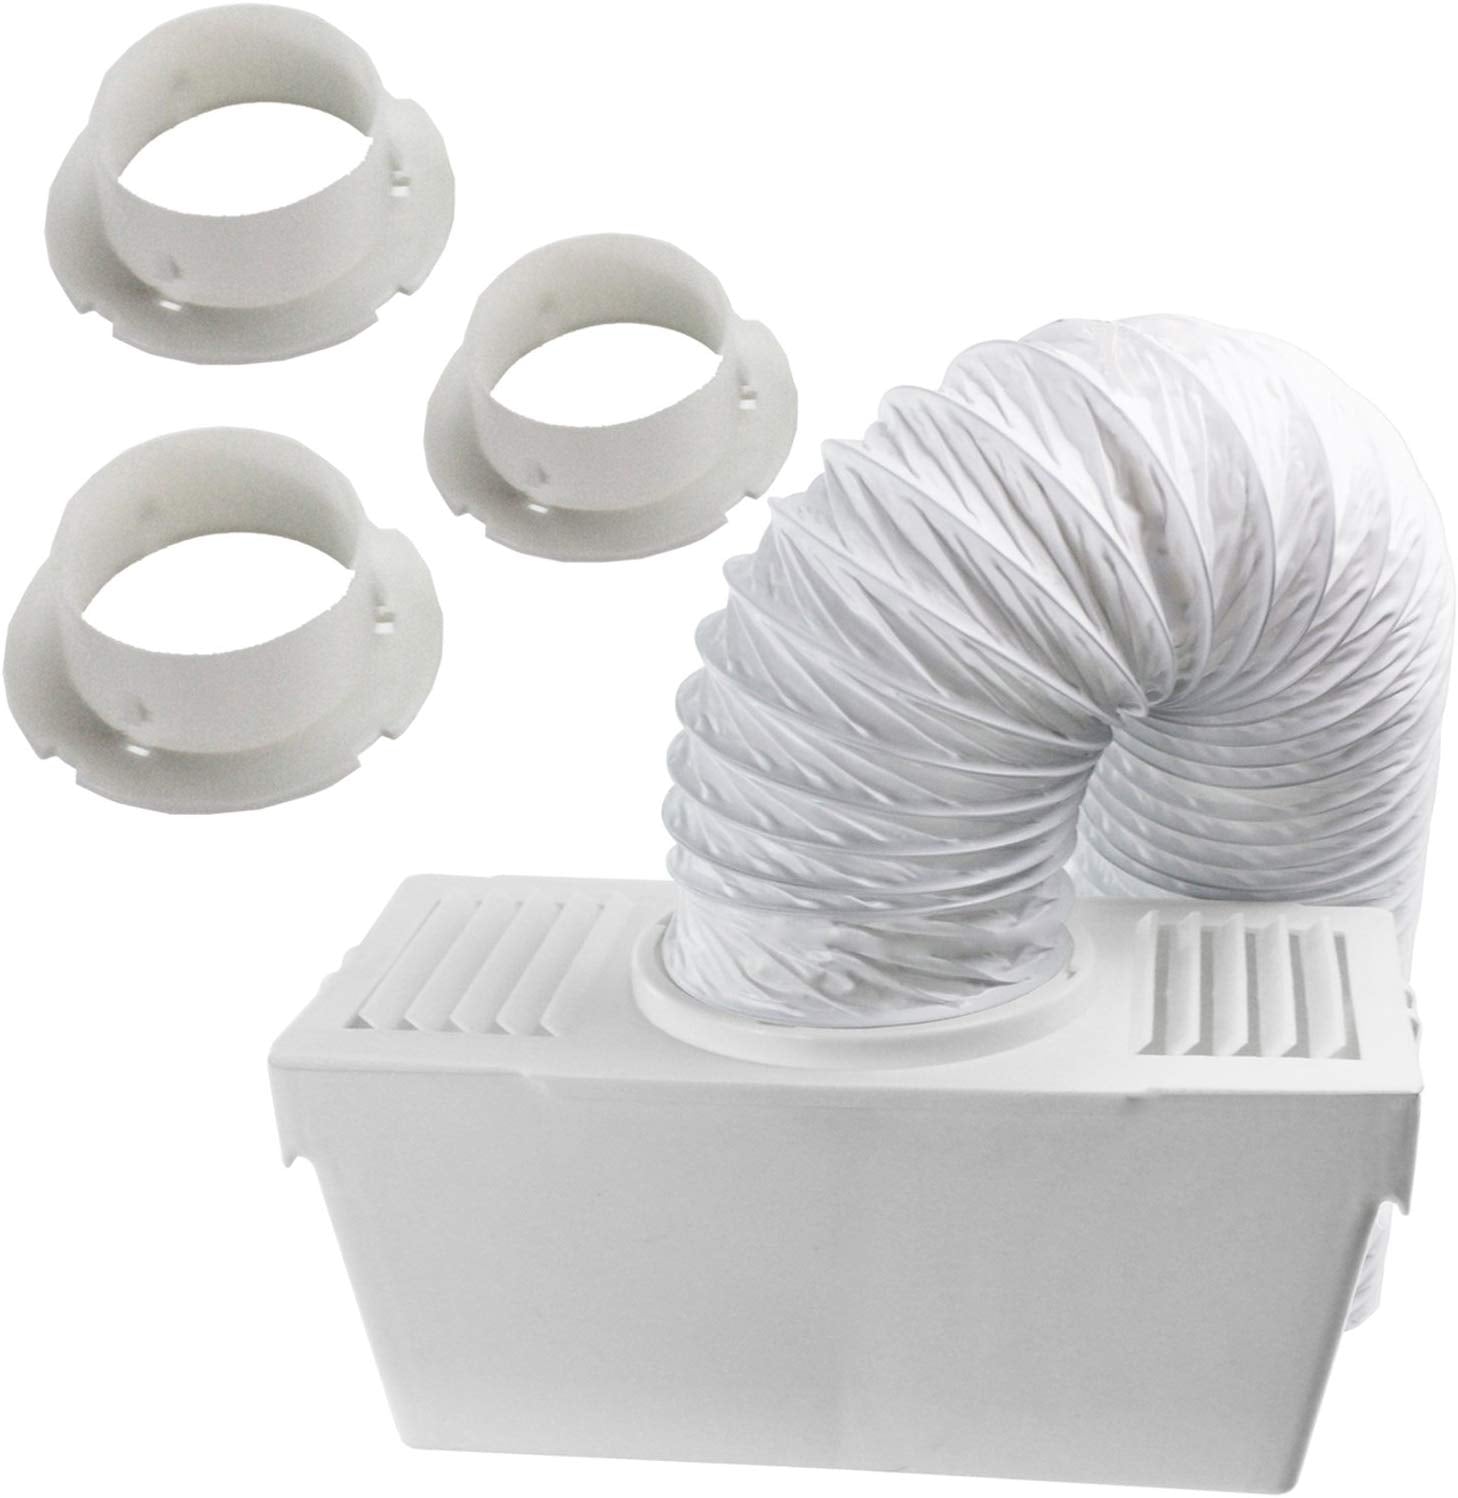 Vent Hose Condenser Kit with 3 x Adapters for John Lewis Tumble Dryer (1.2m)